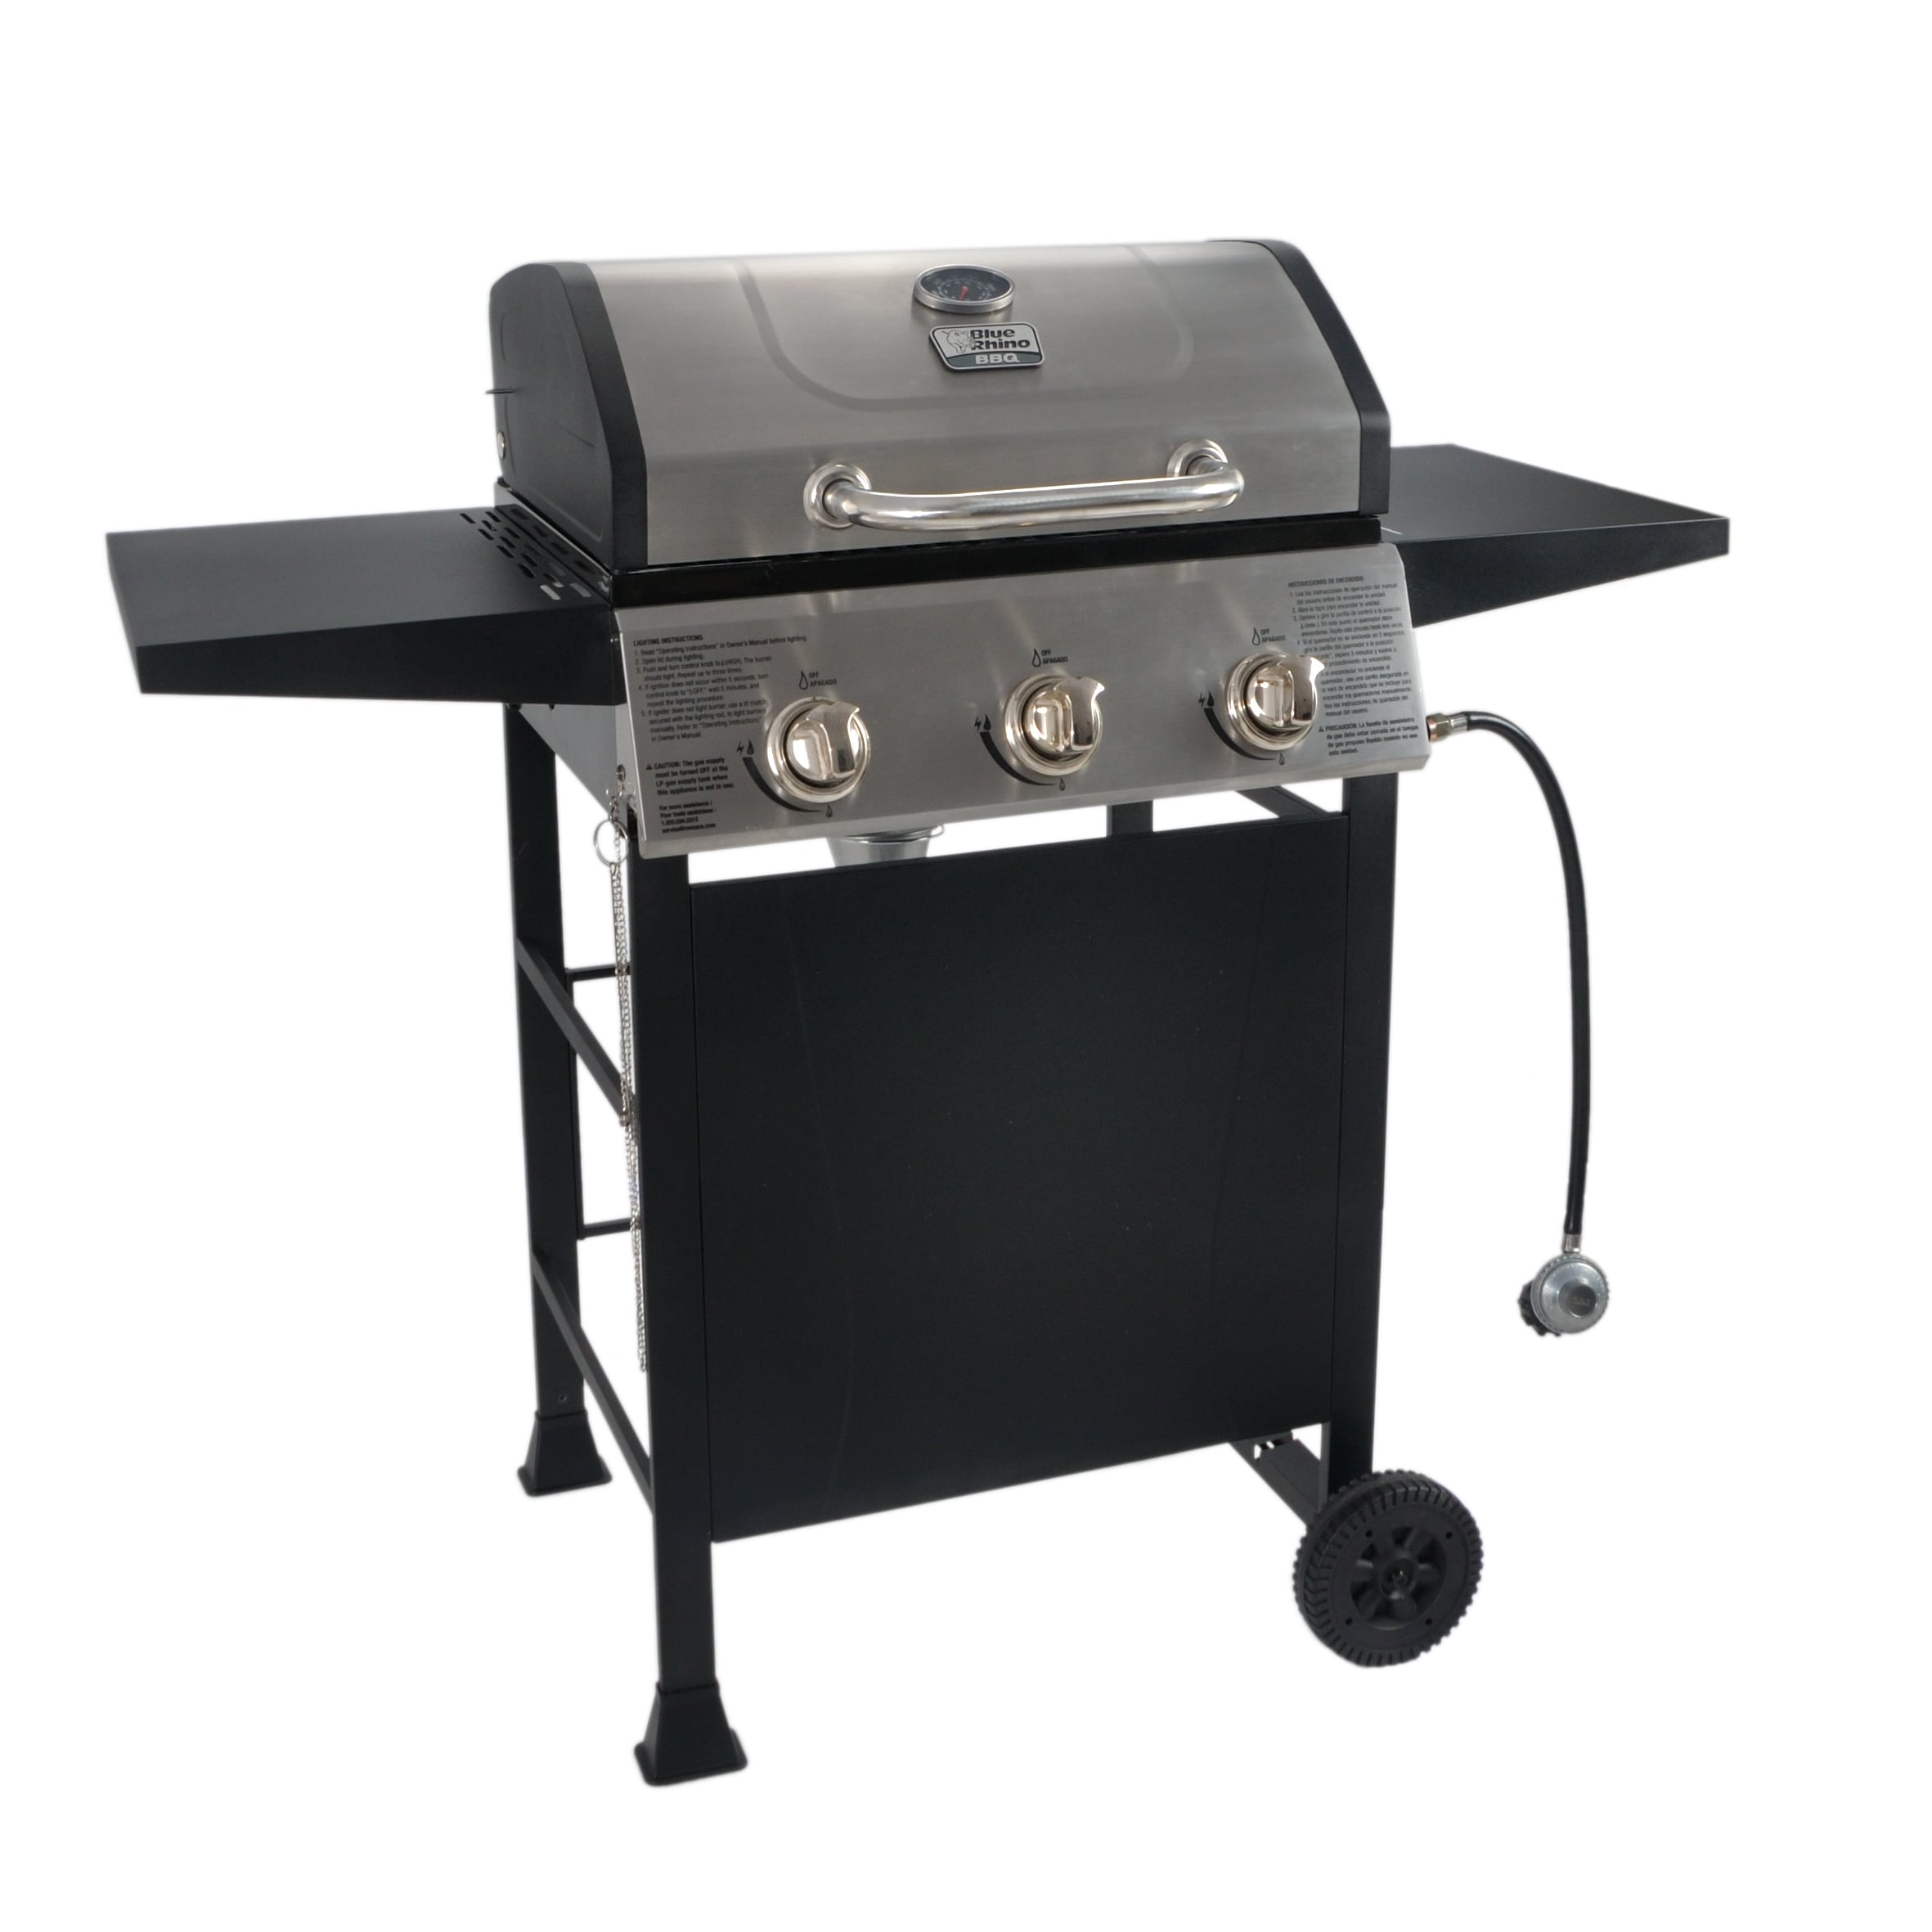  MASTER COOK Classic Liquid Propane Gas Grill, 3 Burner with  Folding Table : Patio, Lawn & Garden